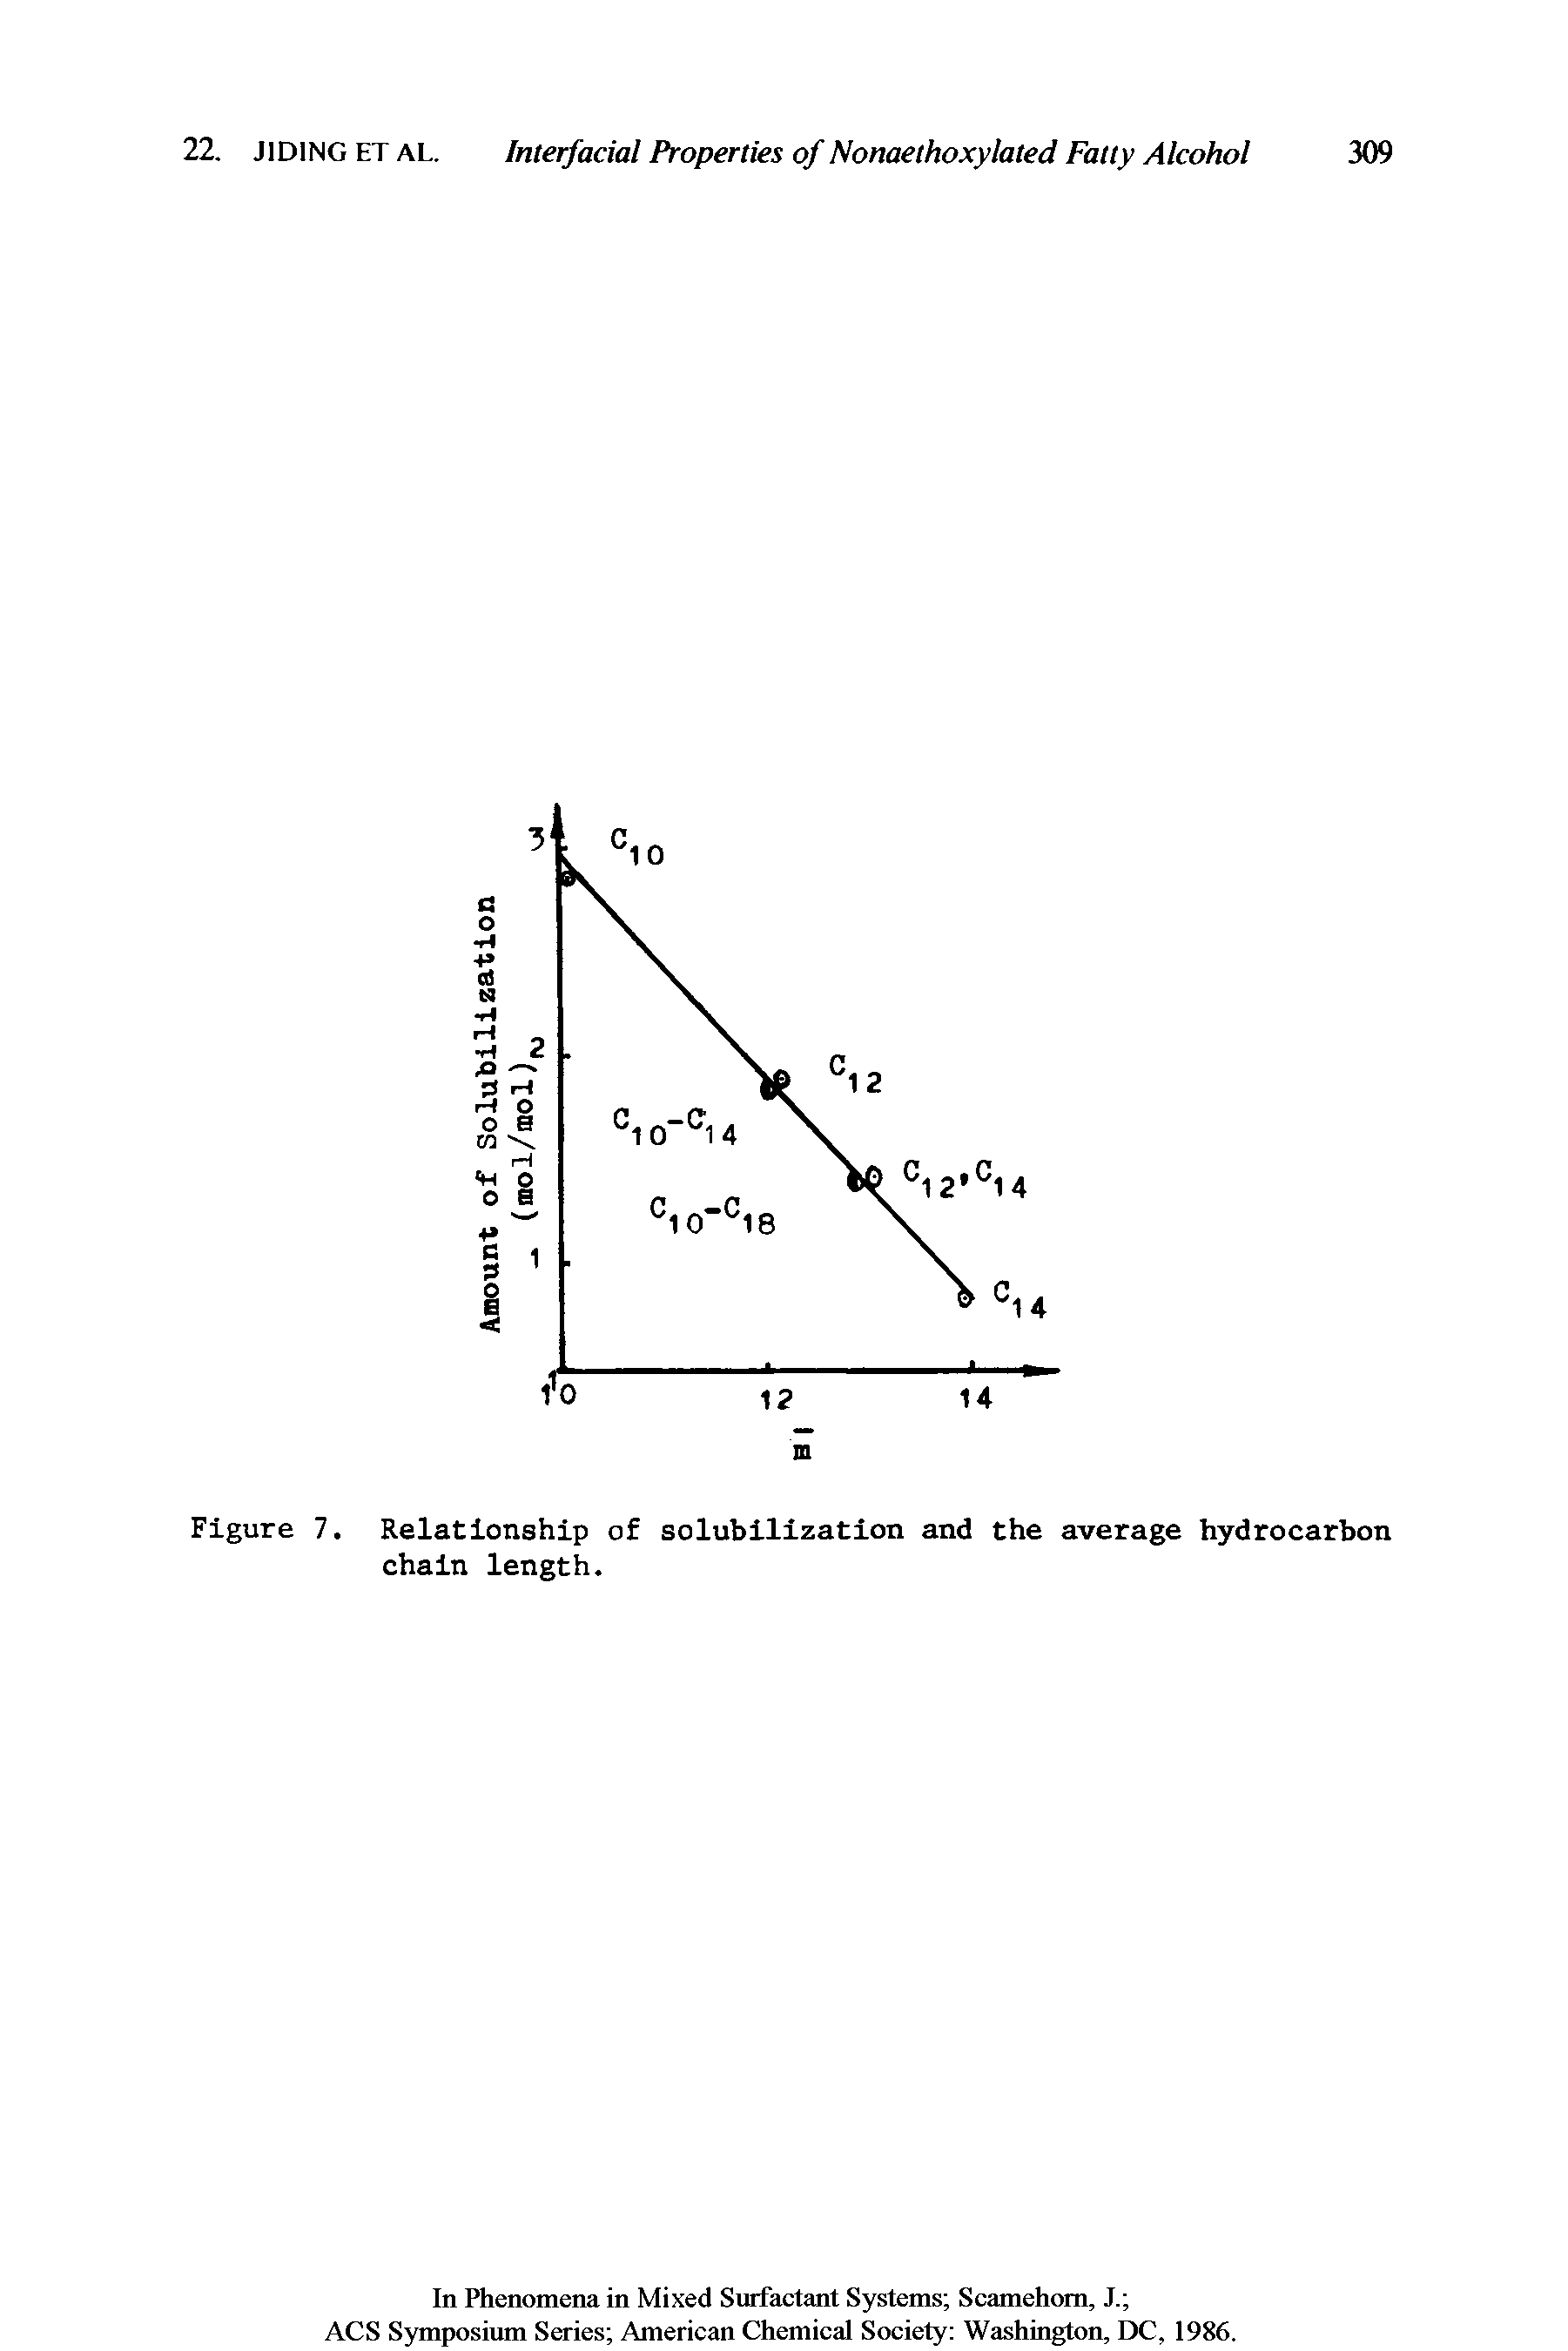 Figure 7. Relationship of solubilization and the average hydrocarbon chain length.